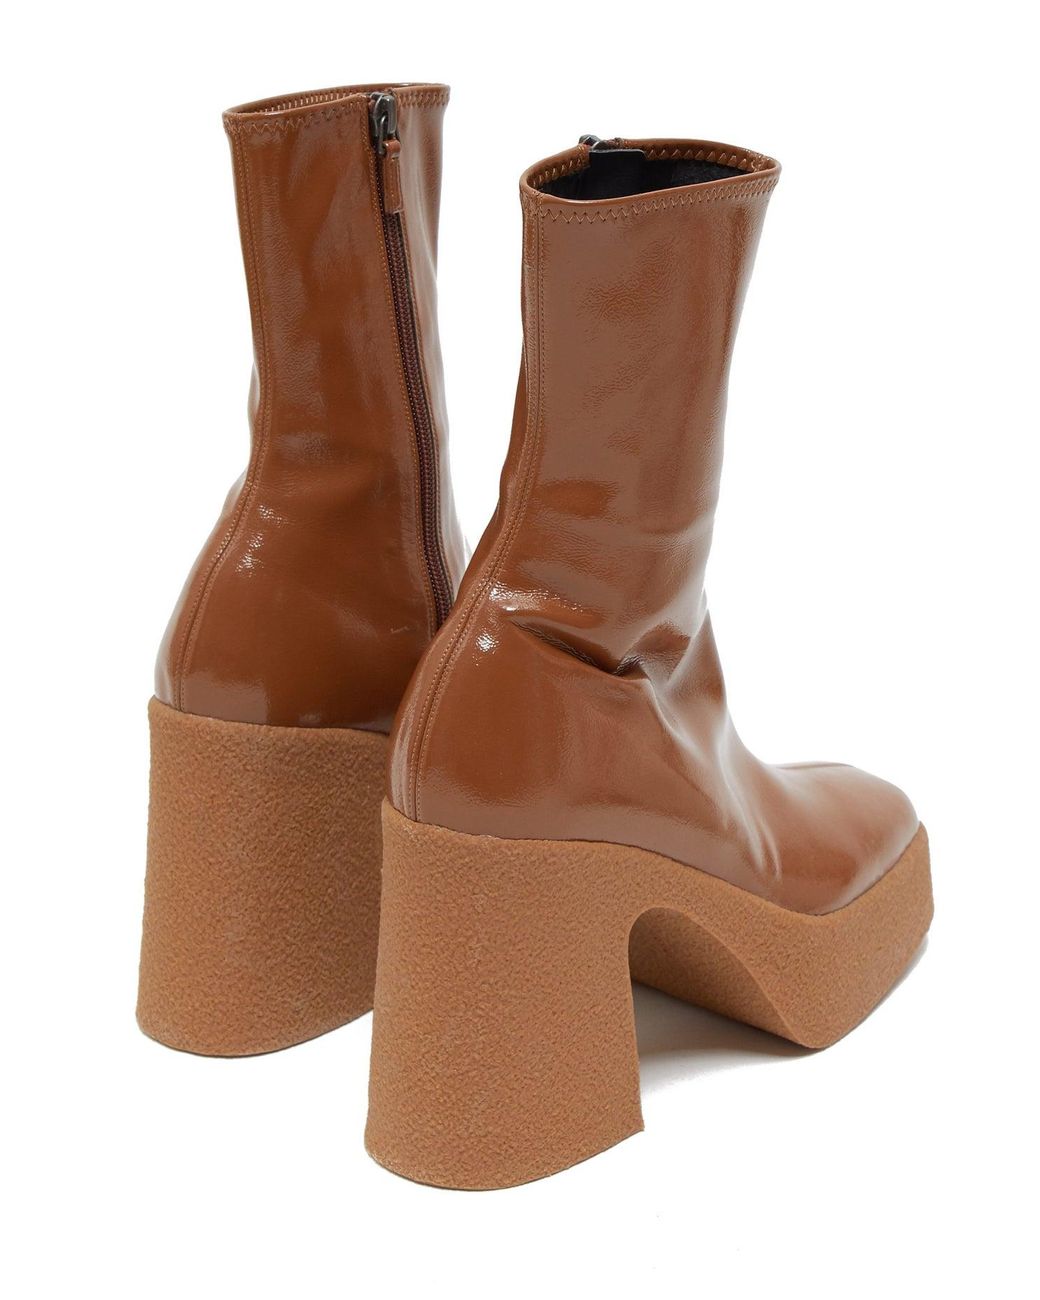 Stella McCartney Patent Faux-leather Platform Ankle Boots in Brown | Lyst